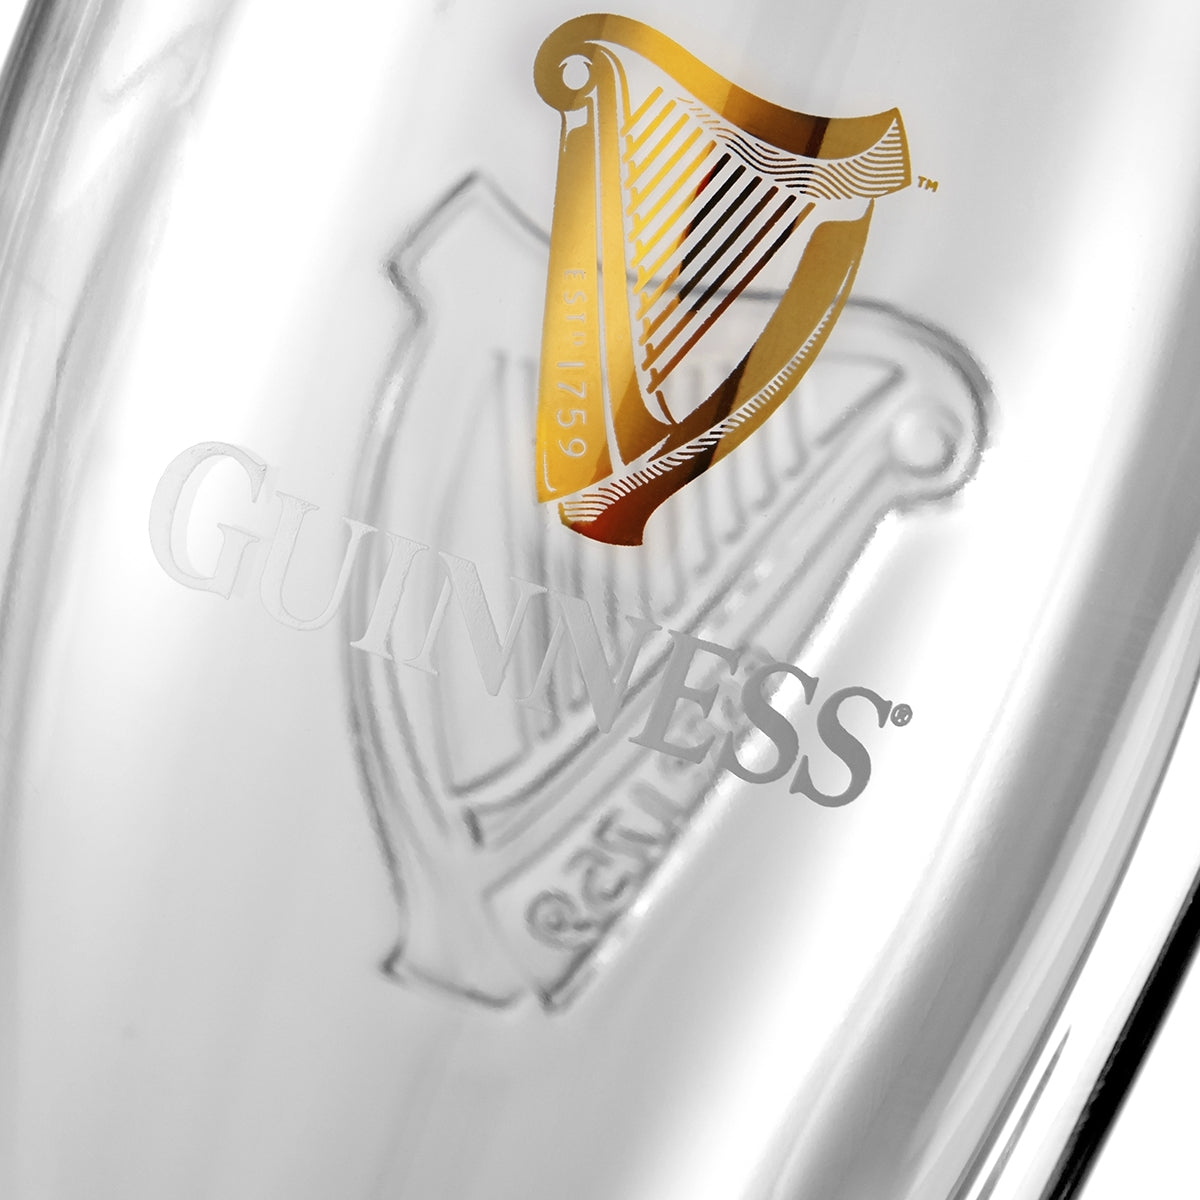 A close up of an embossed Guinness Pint Glass 4 Pack.